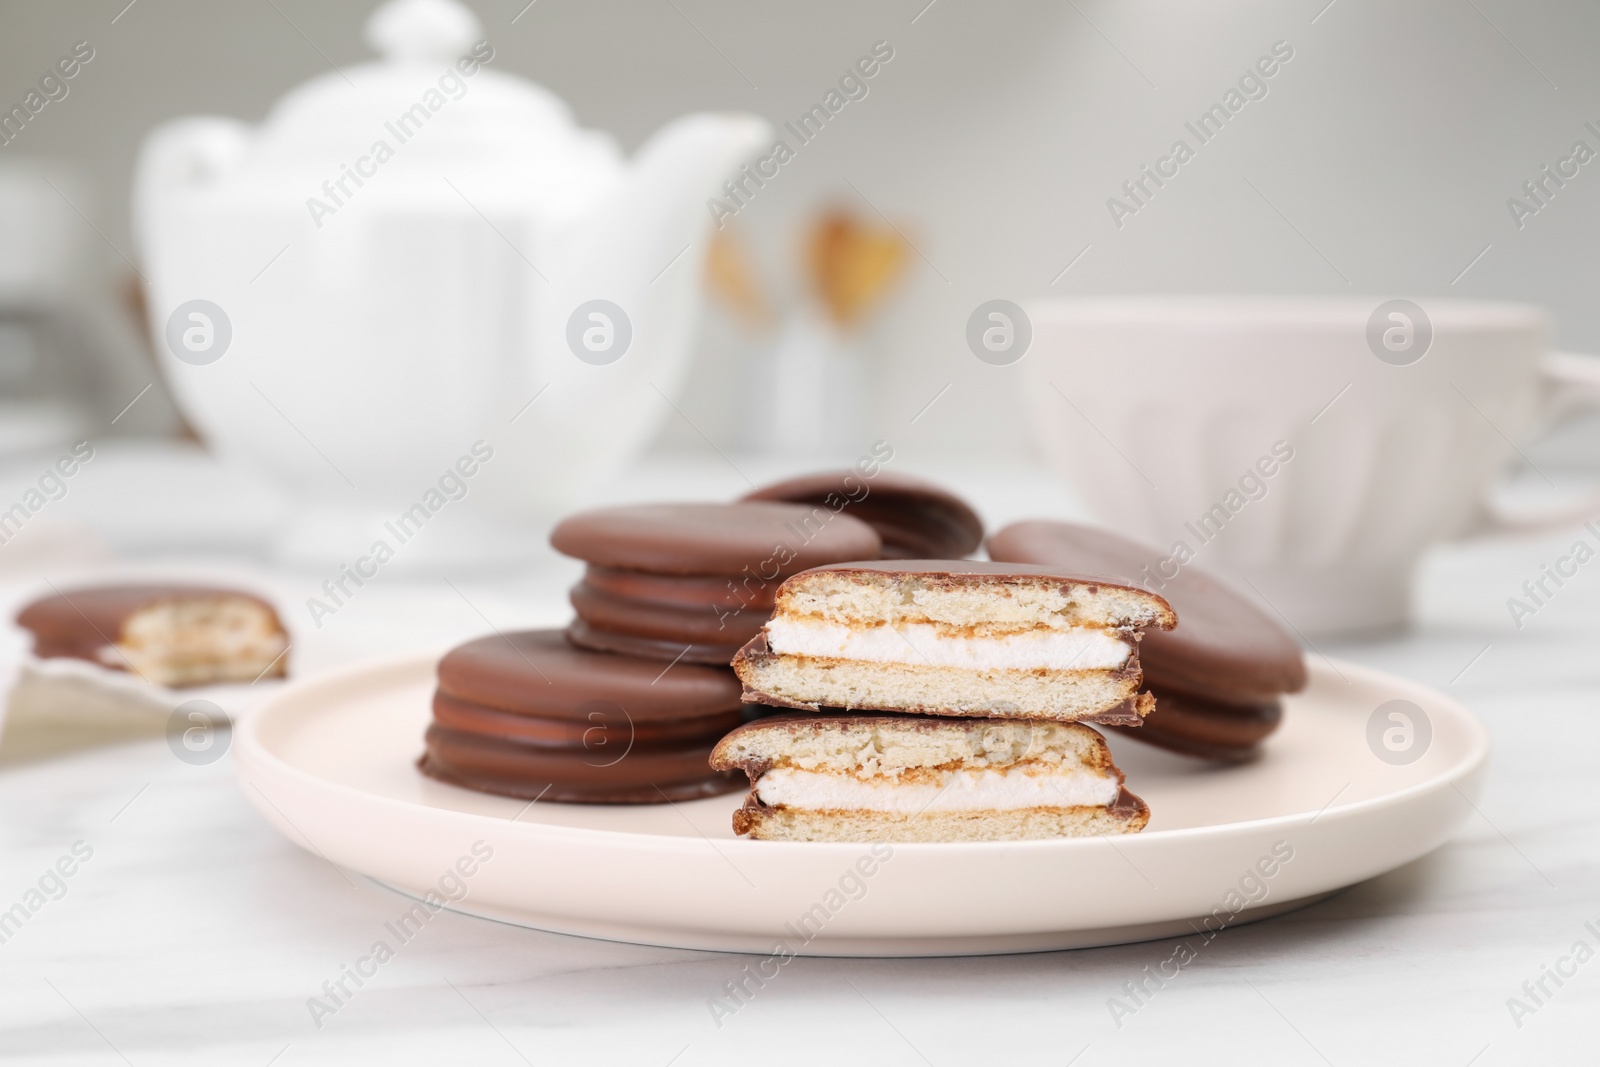 Photo of Plate with delicious choco pies on white marble table in kitchen